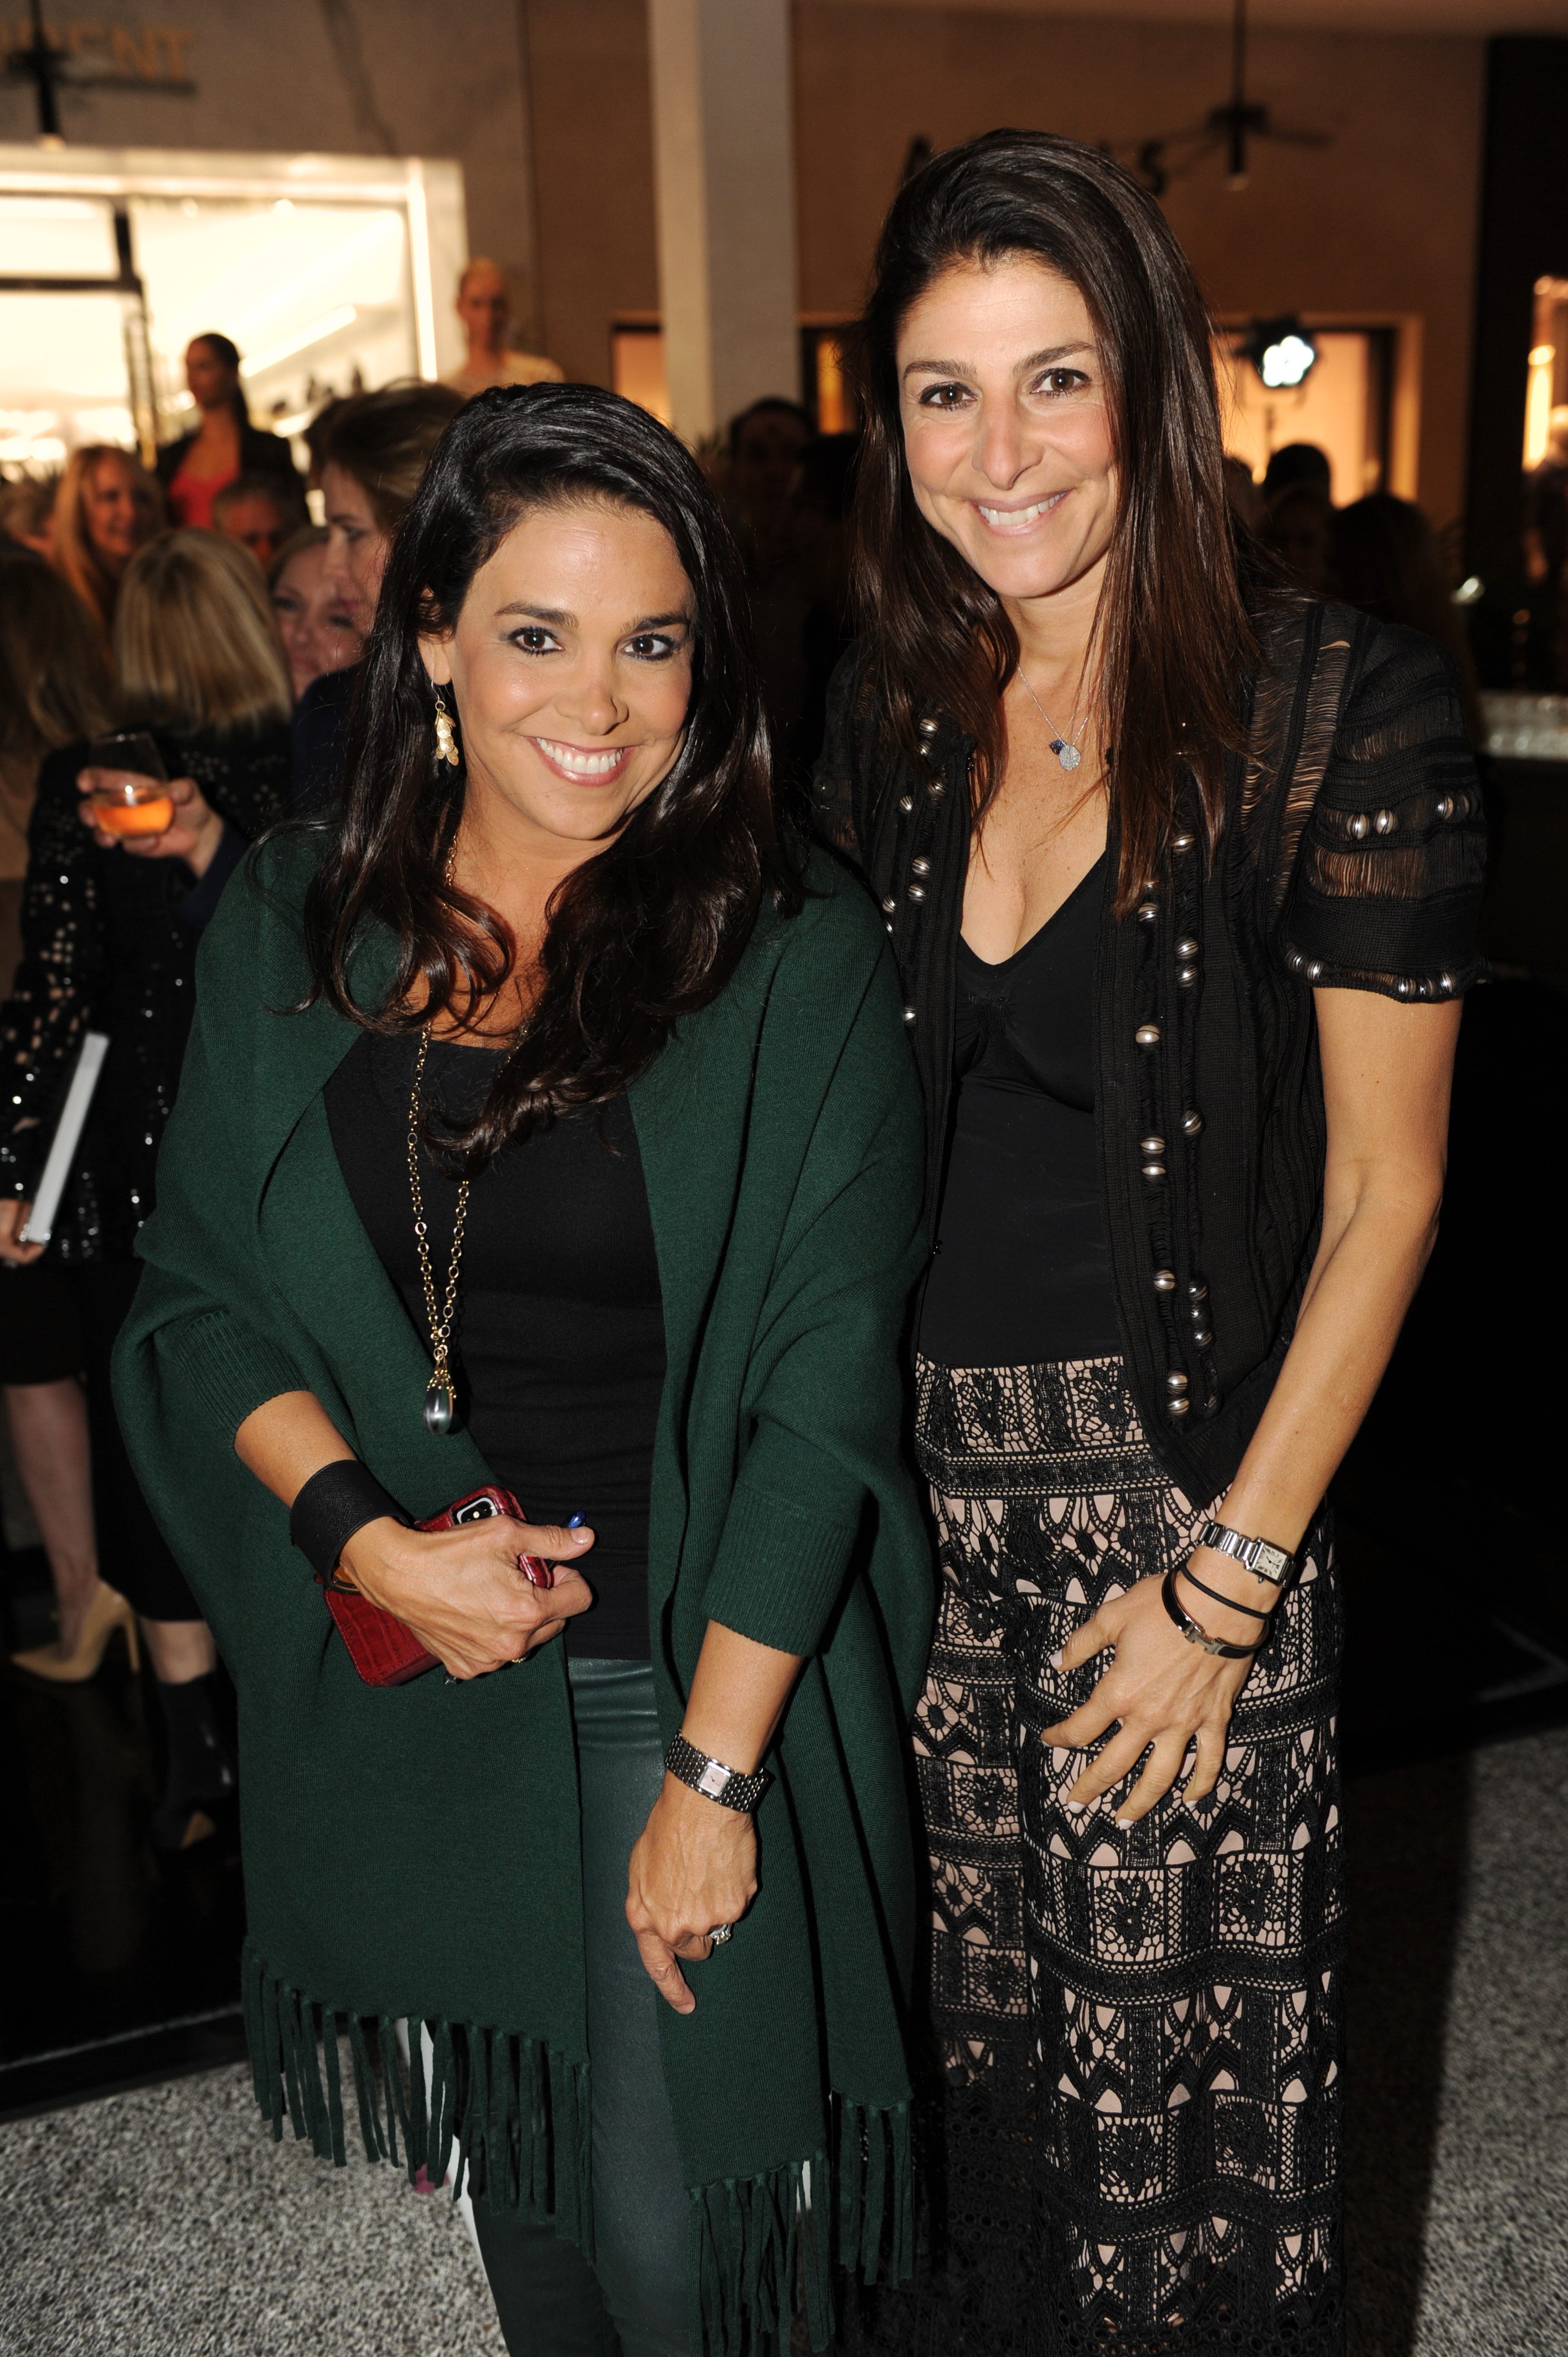 Stephanie Sayfie Aagaard & Lisa Sayfie at Theater of Shopping book launch